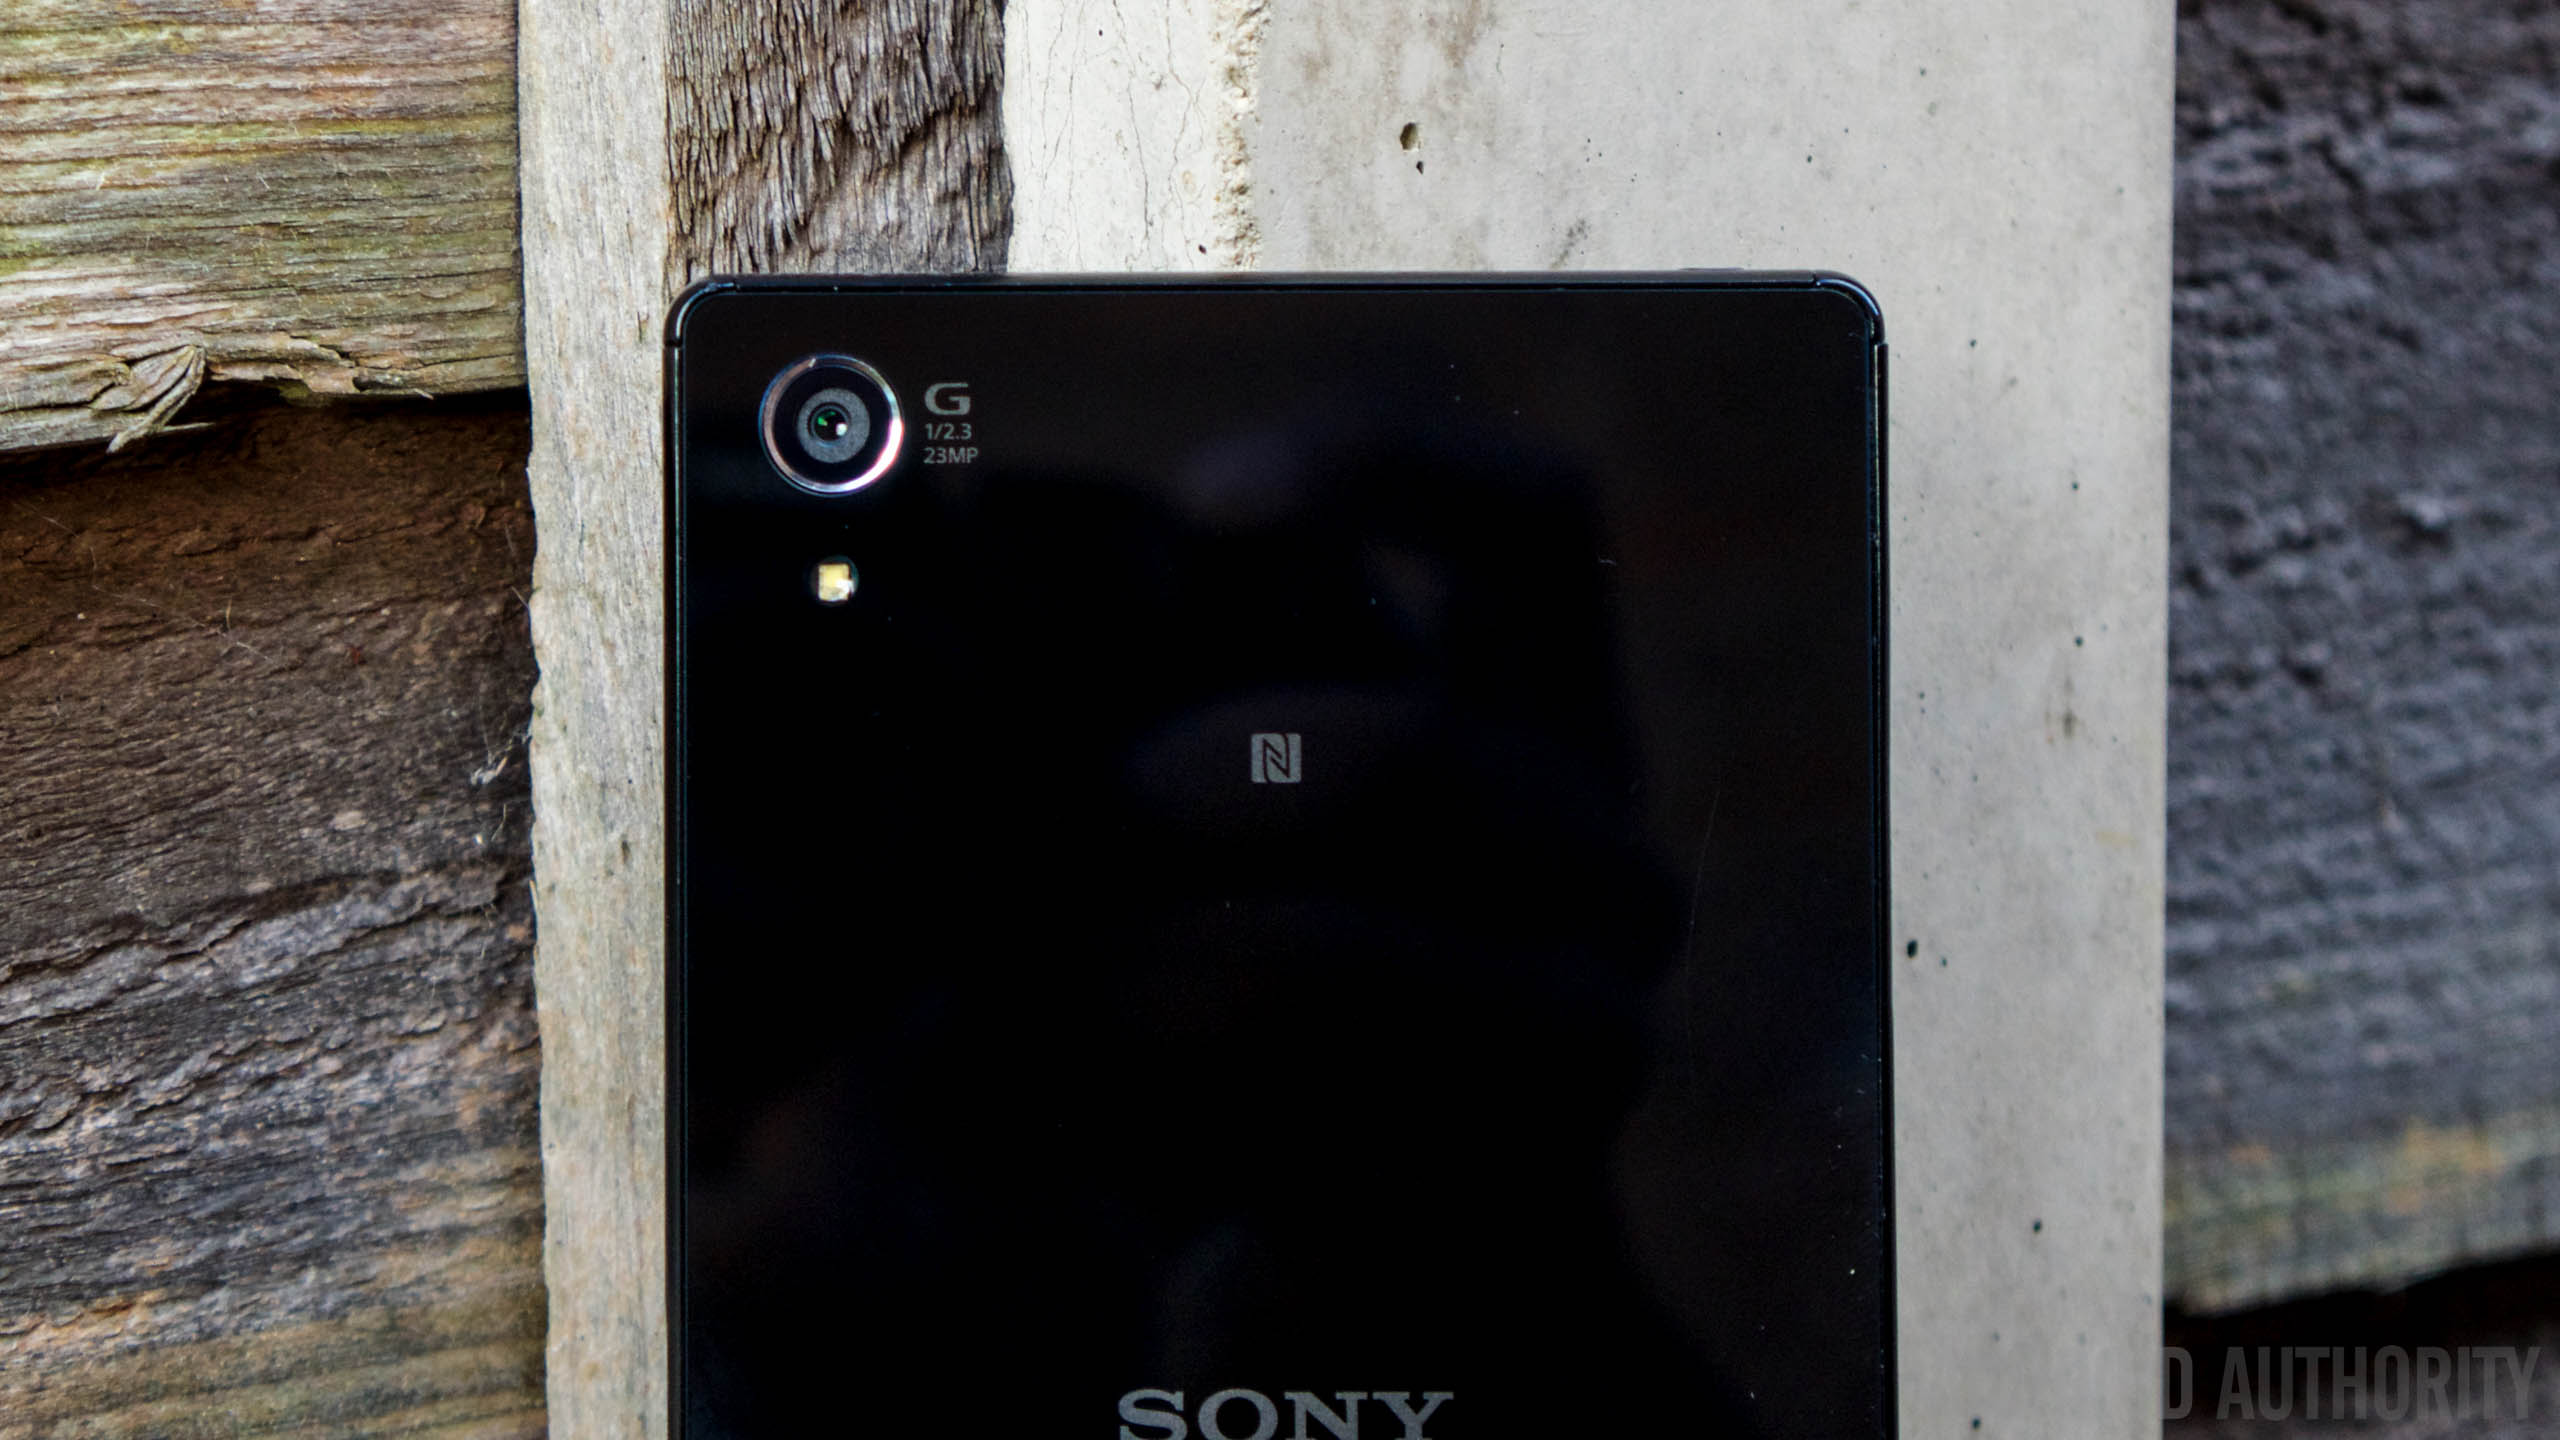 Sony Xperia Z5 Premium review: Astonishing resolution results in